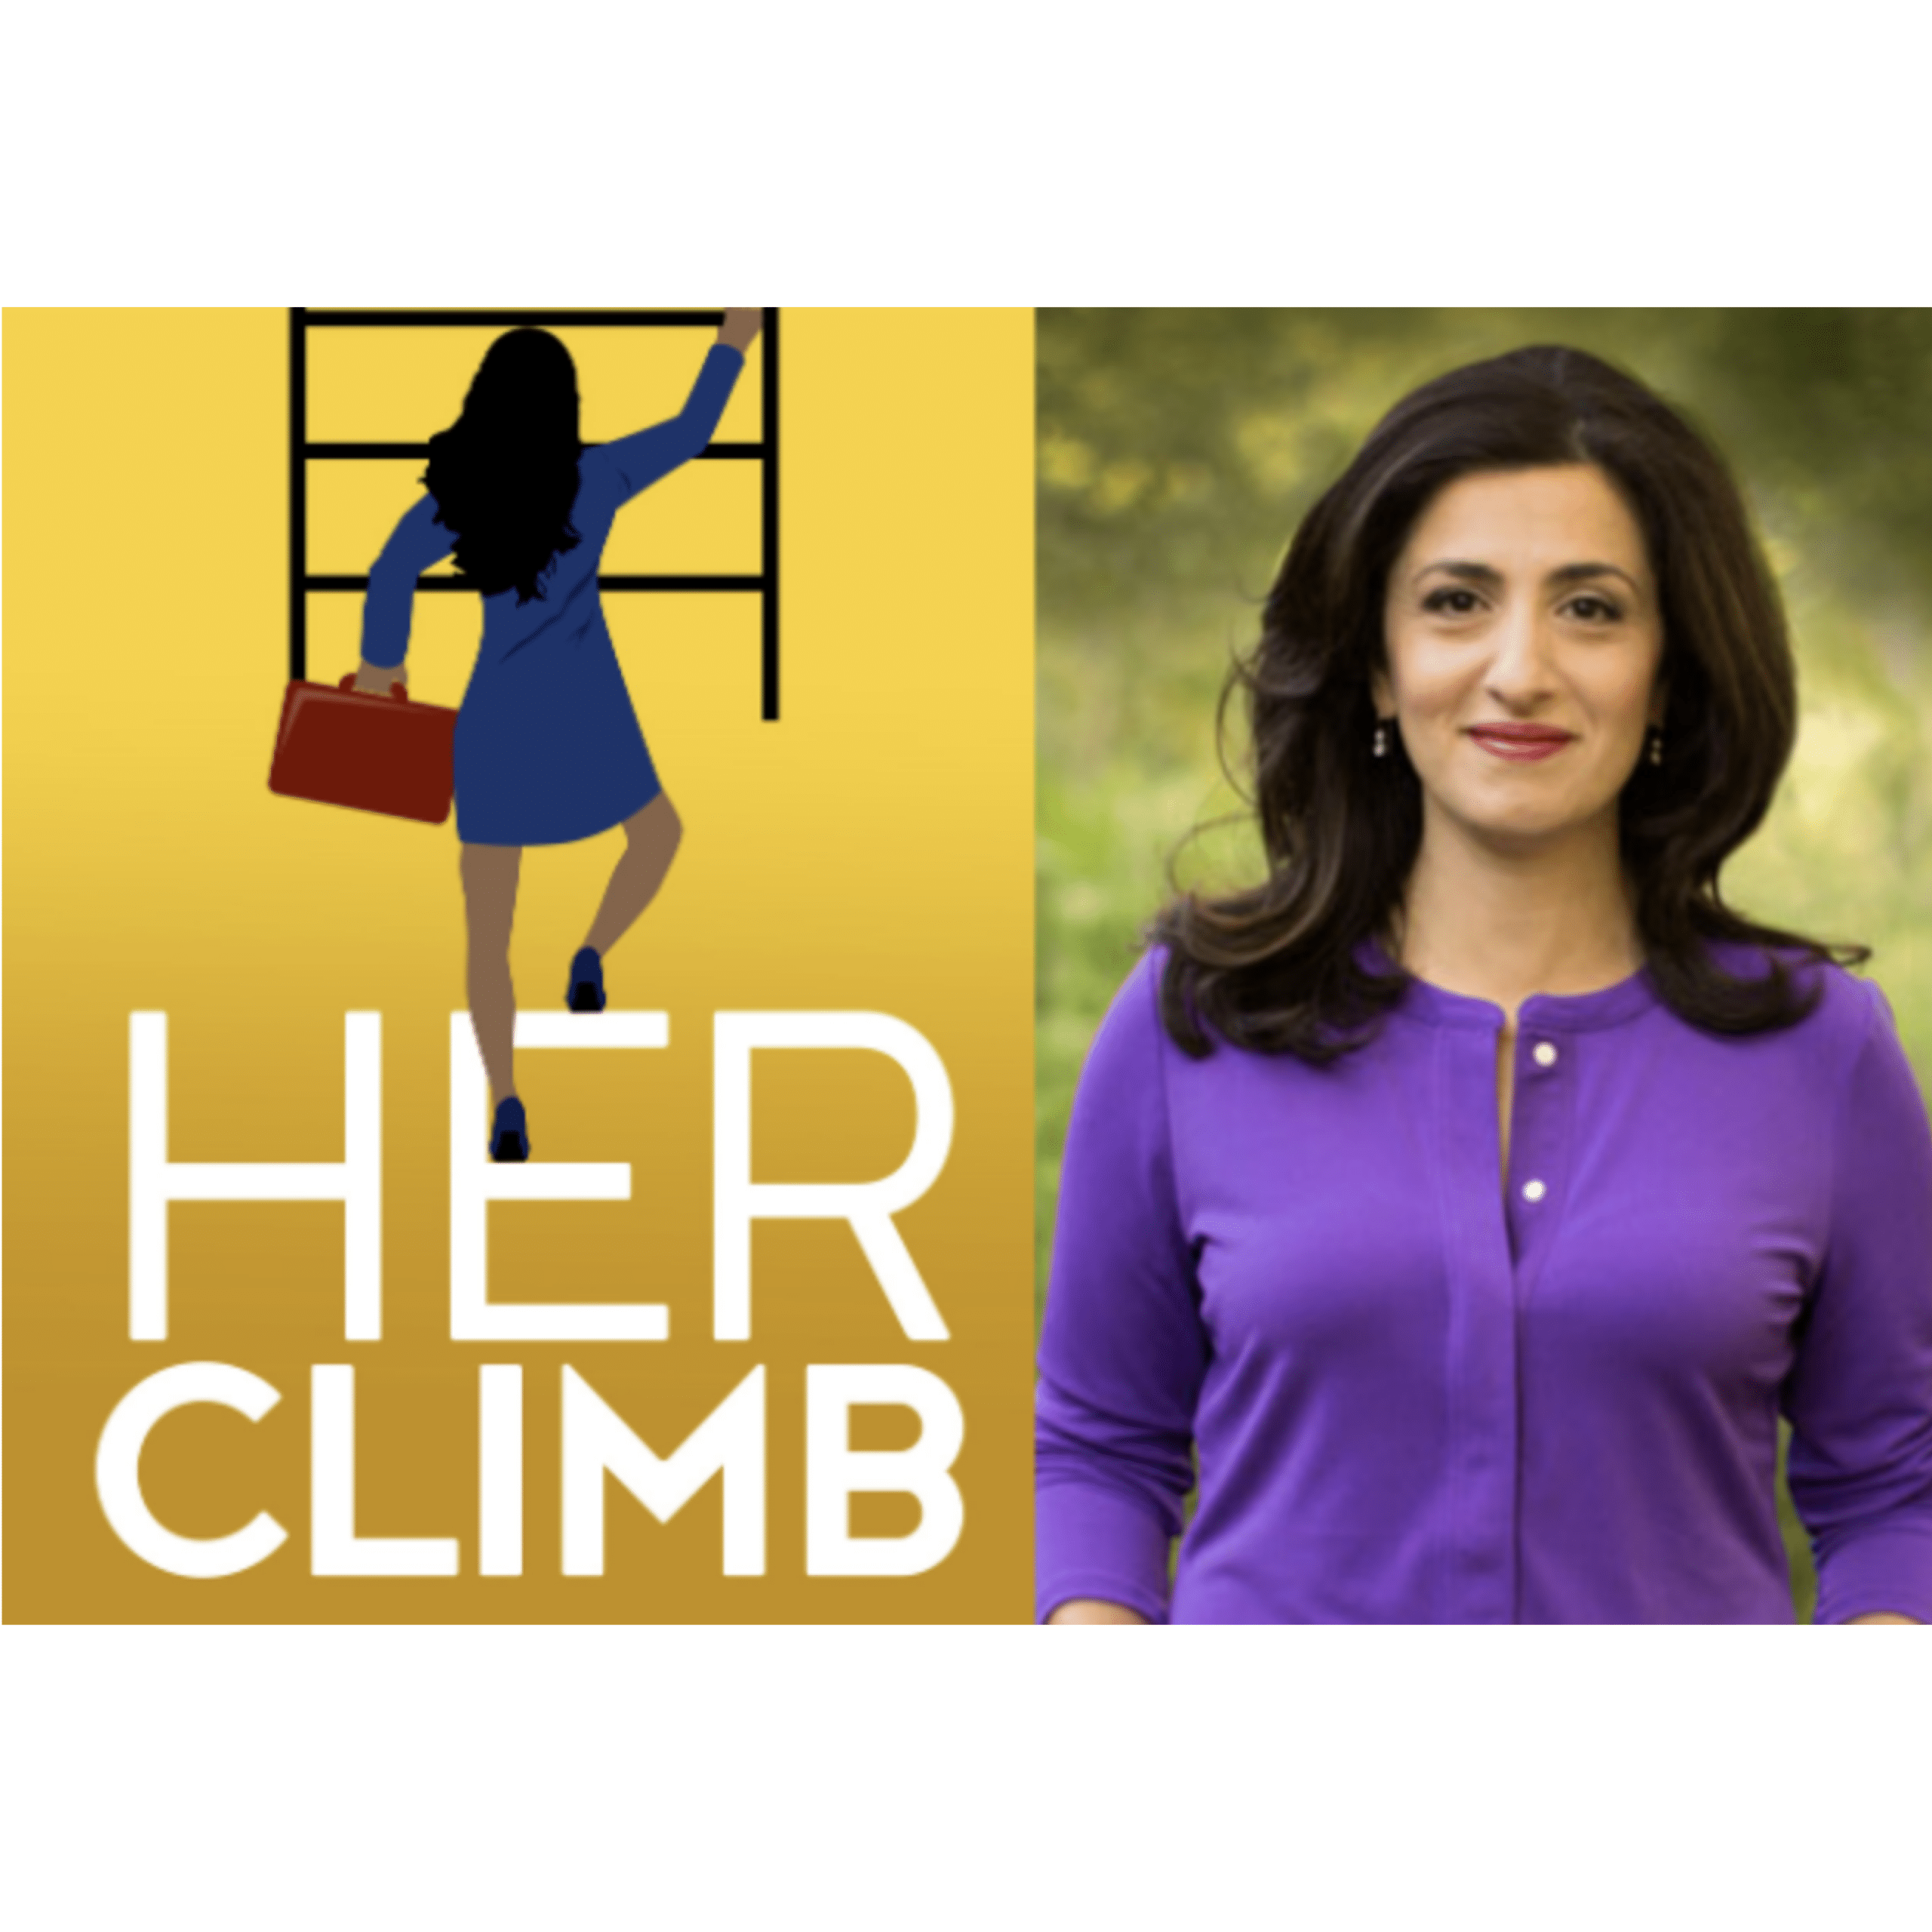 Her Climb logo with a photo of a woman wearing a purple top smiling